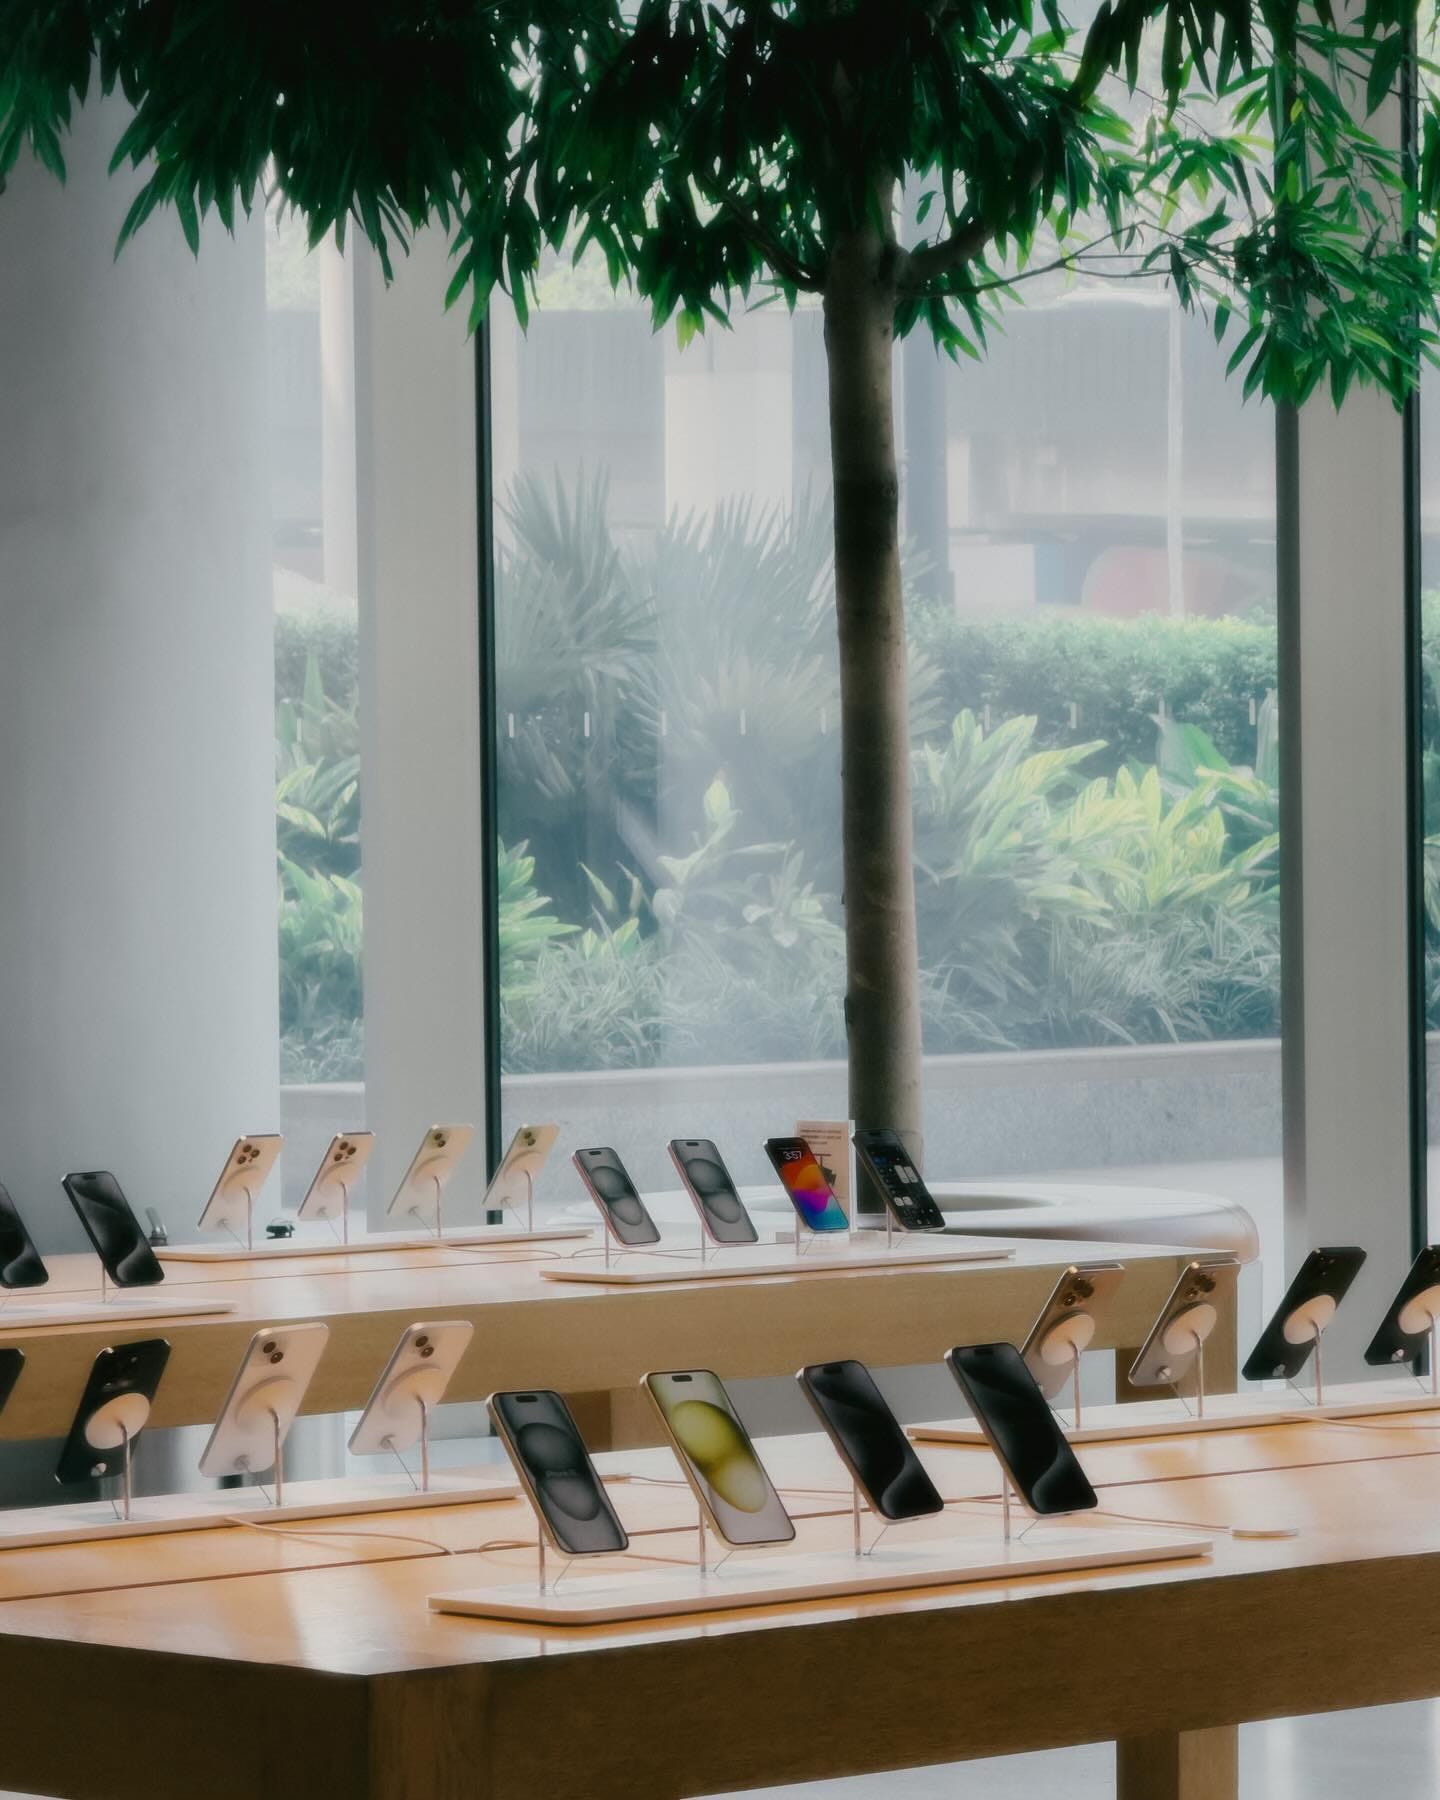 Tables filled with iPhones inside Apple BKC. Beyond the windows are lush plants.